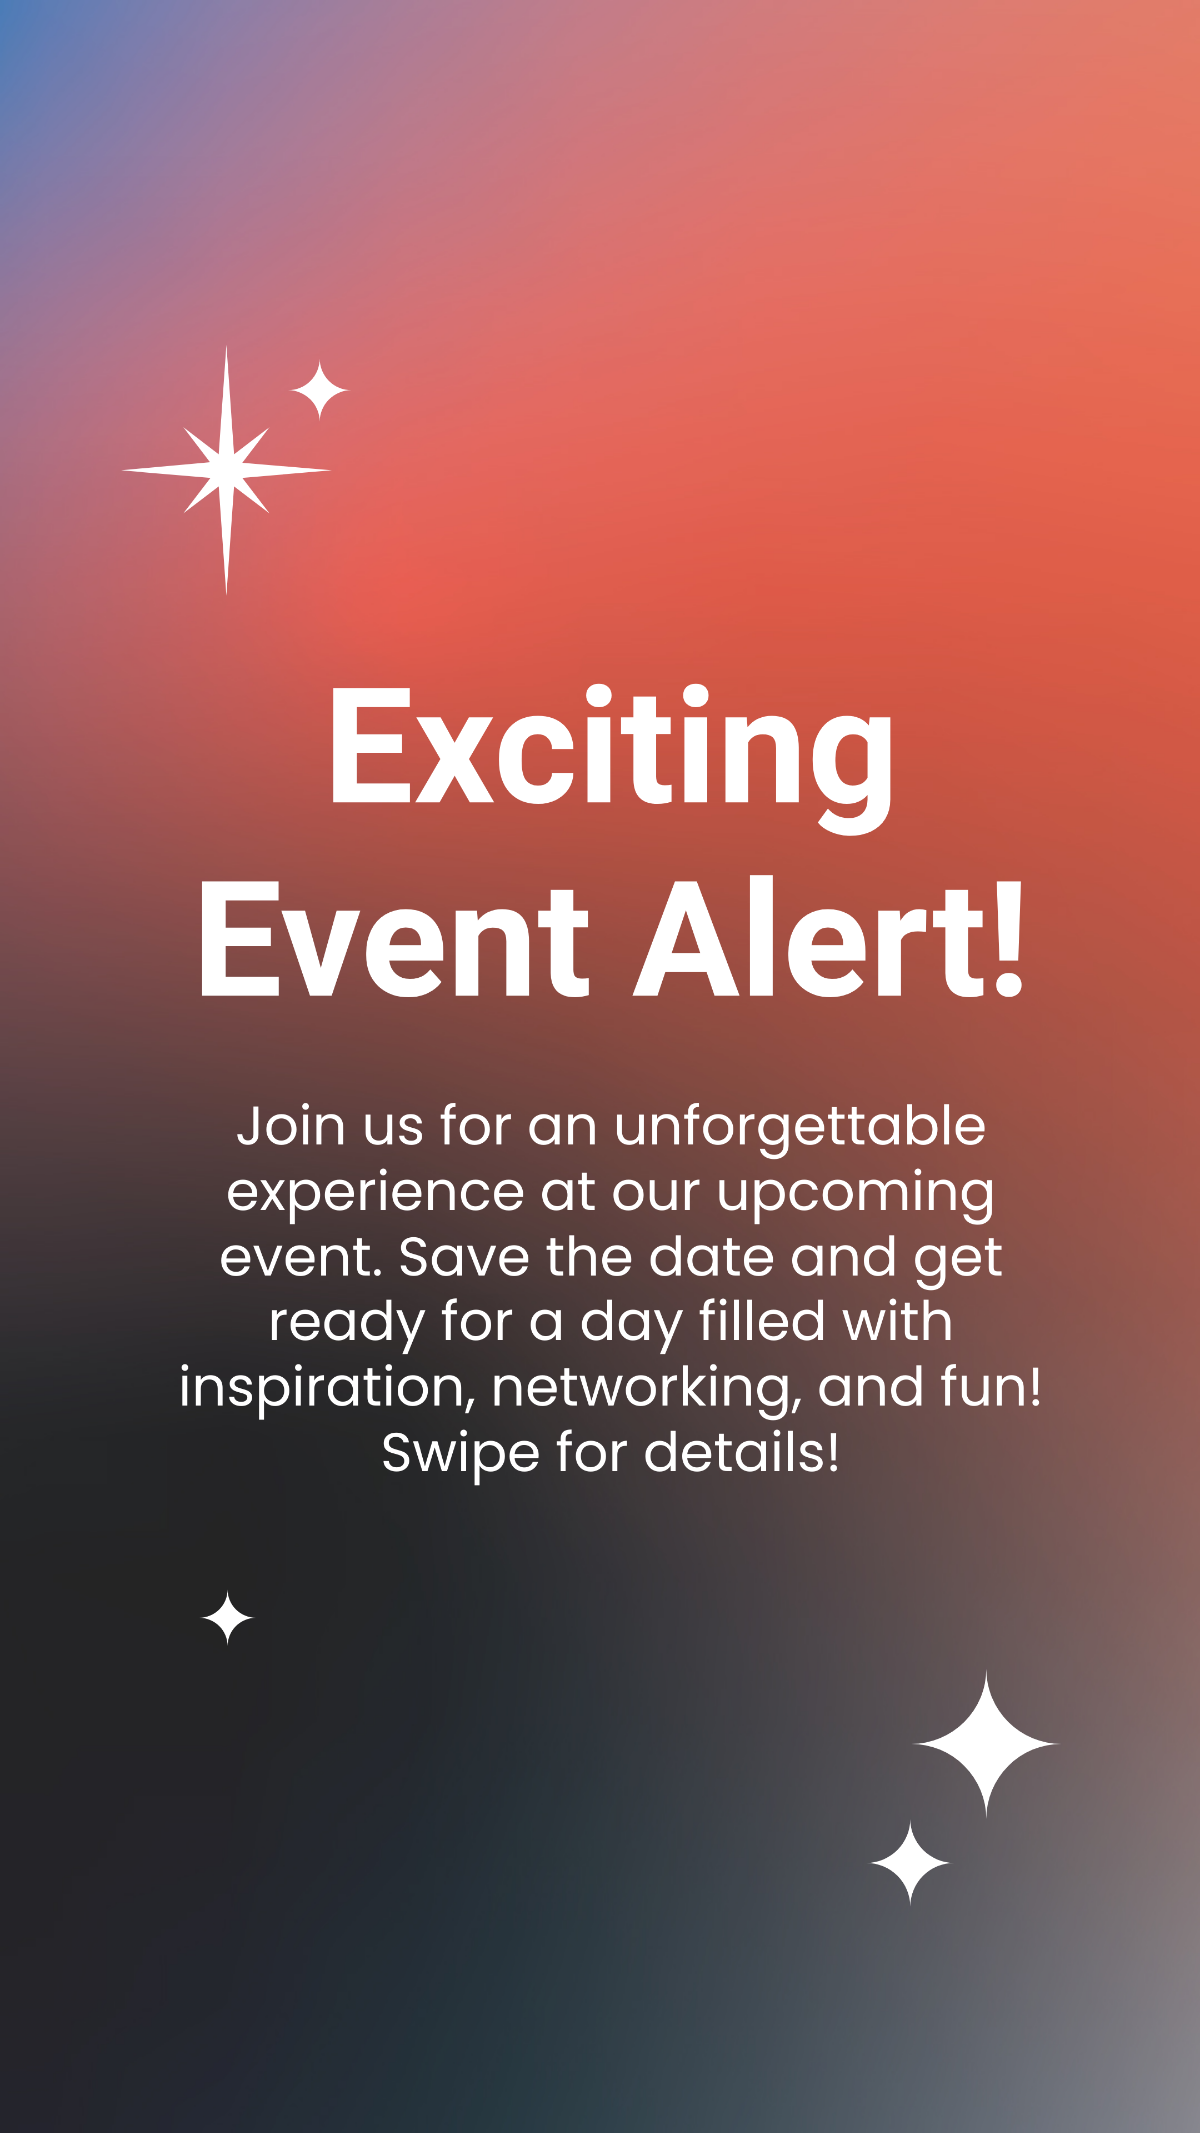 Free Event Announcement Carousel Instagram Post Template